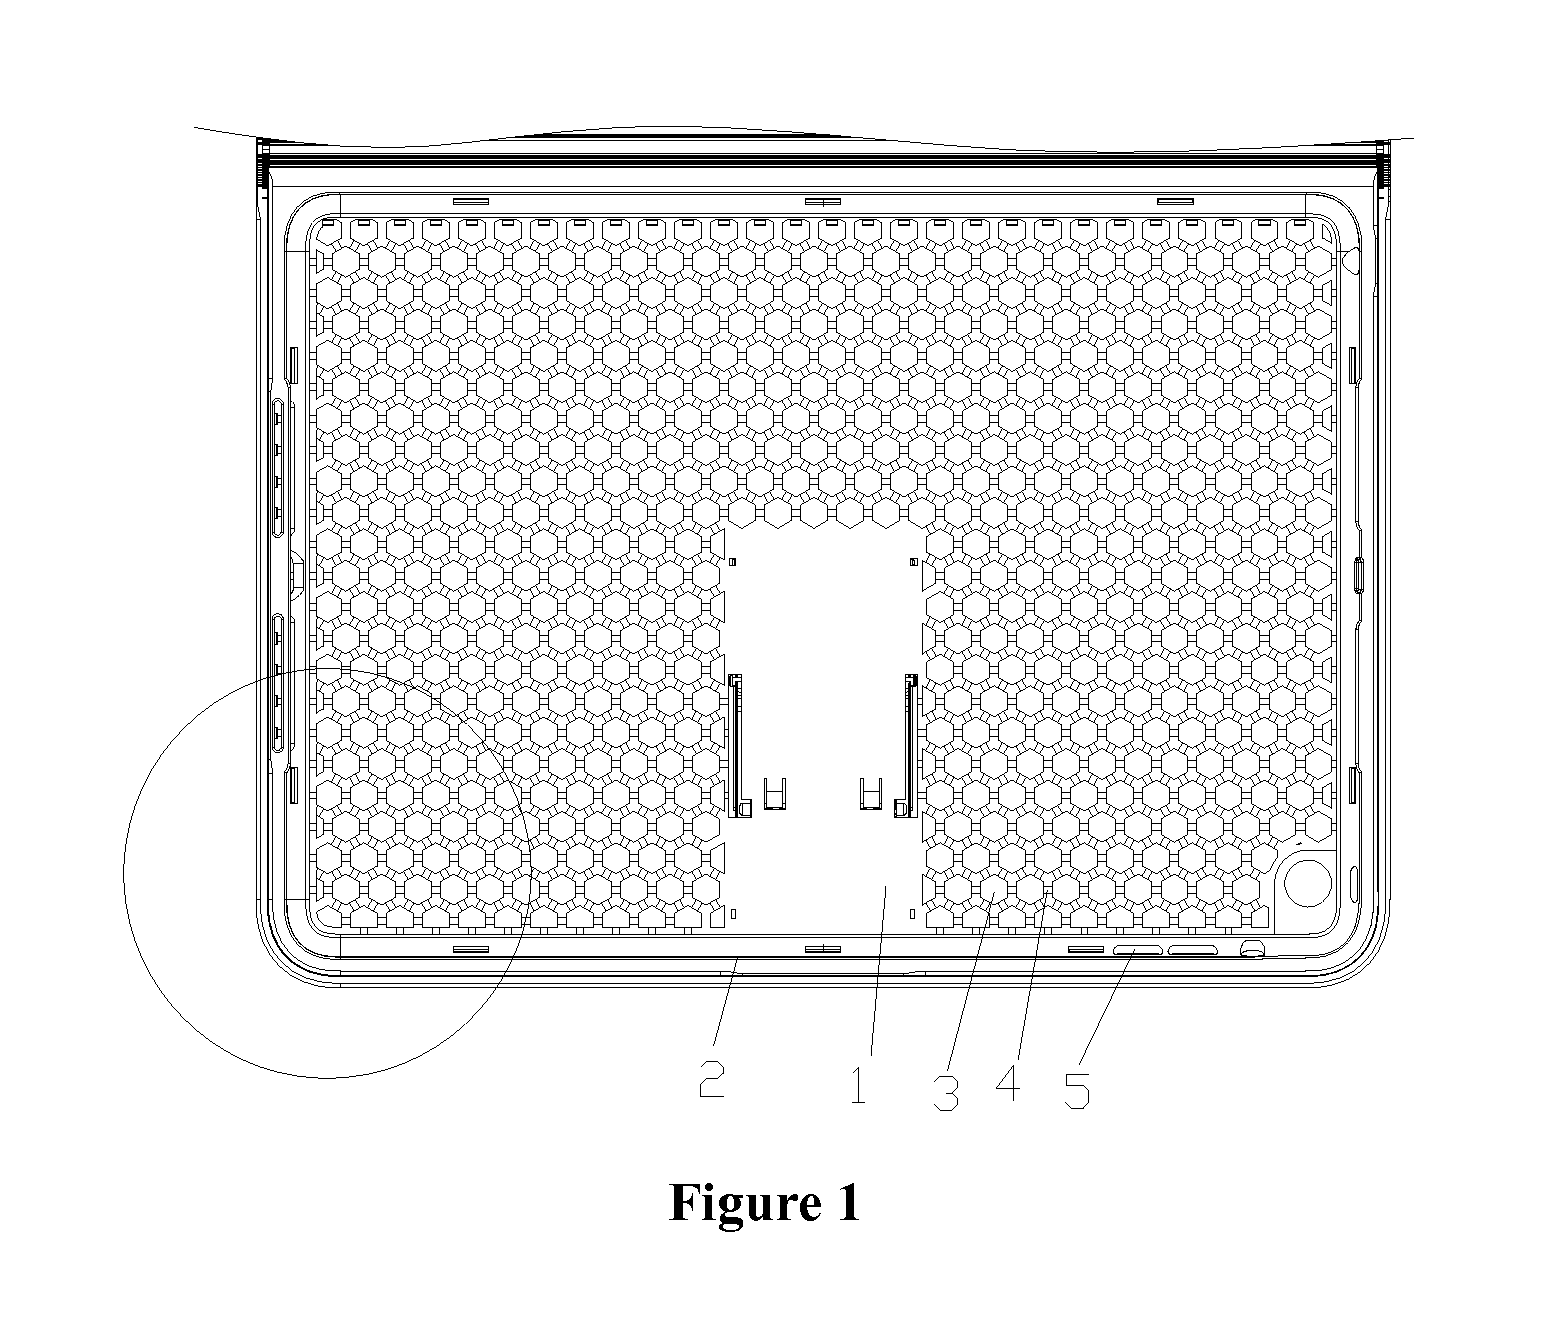 Protective case with heat dissipation structure for electronic products